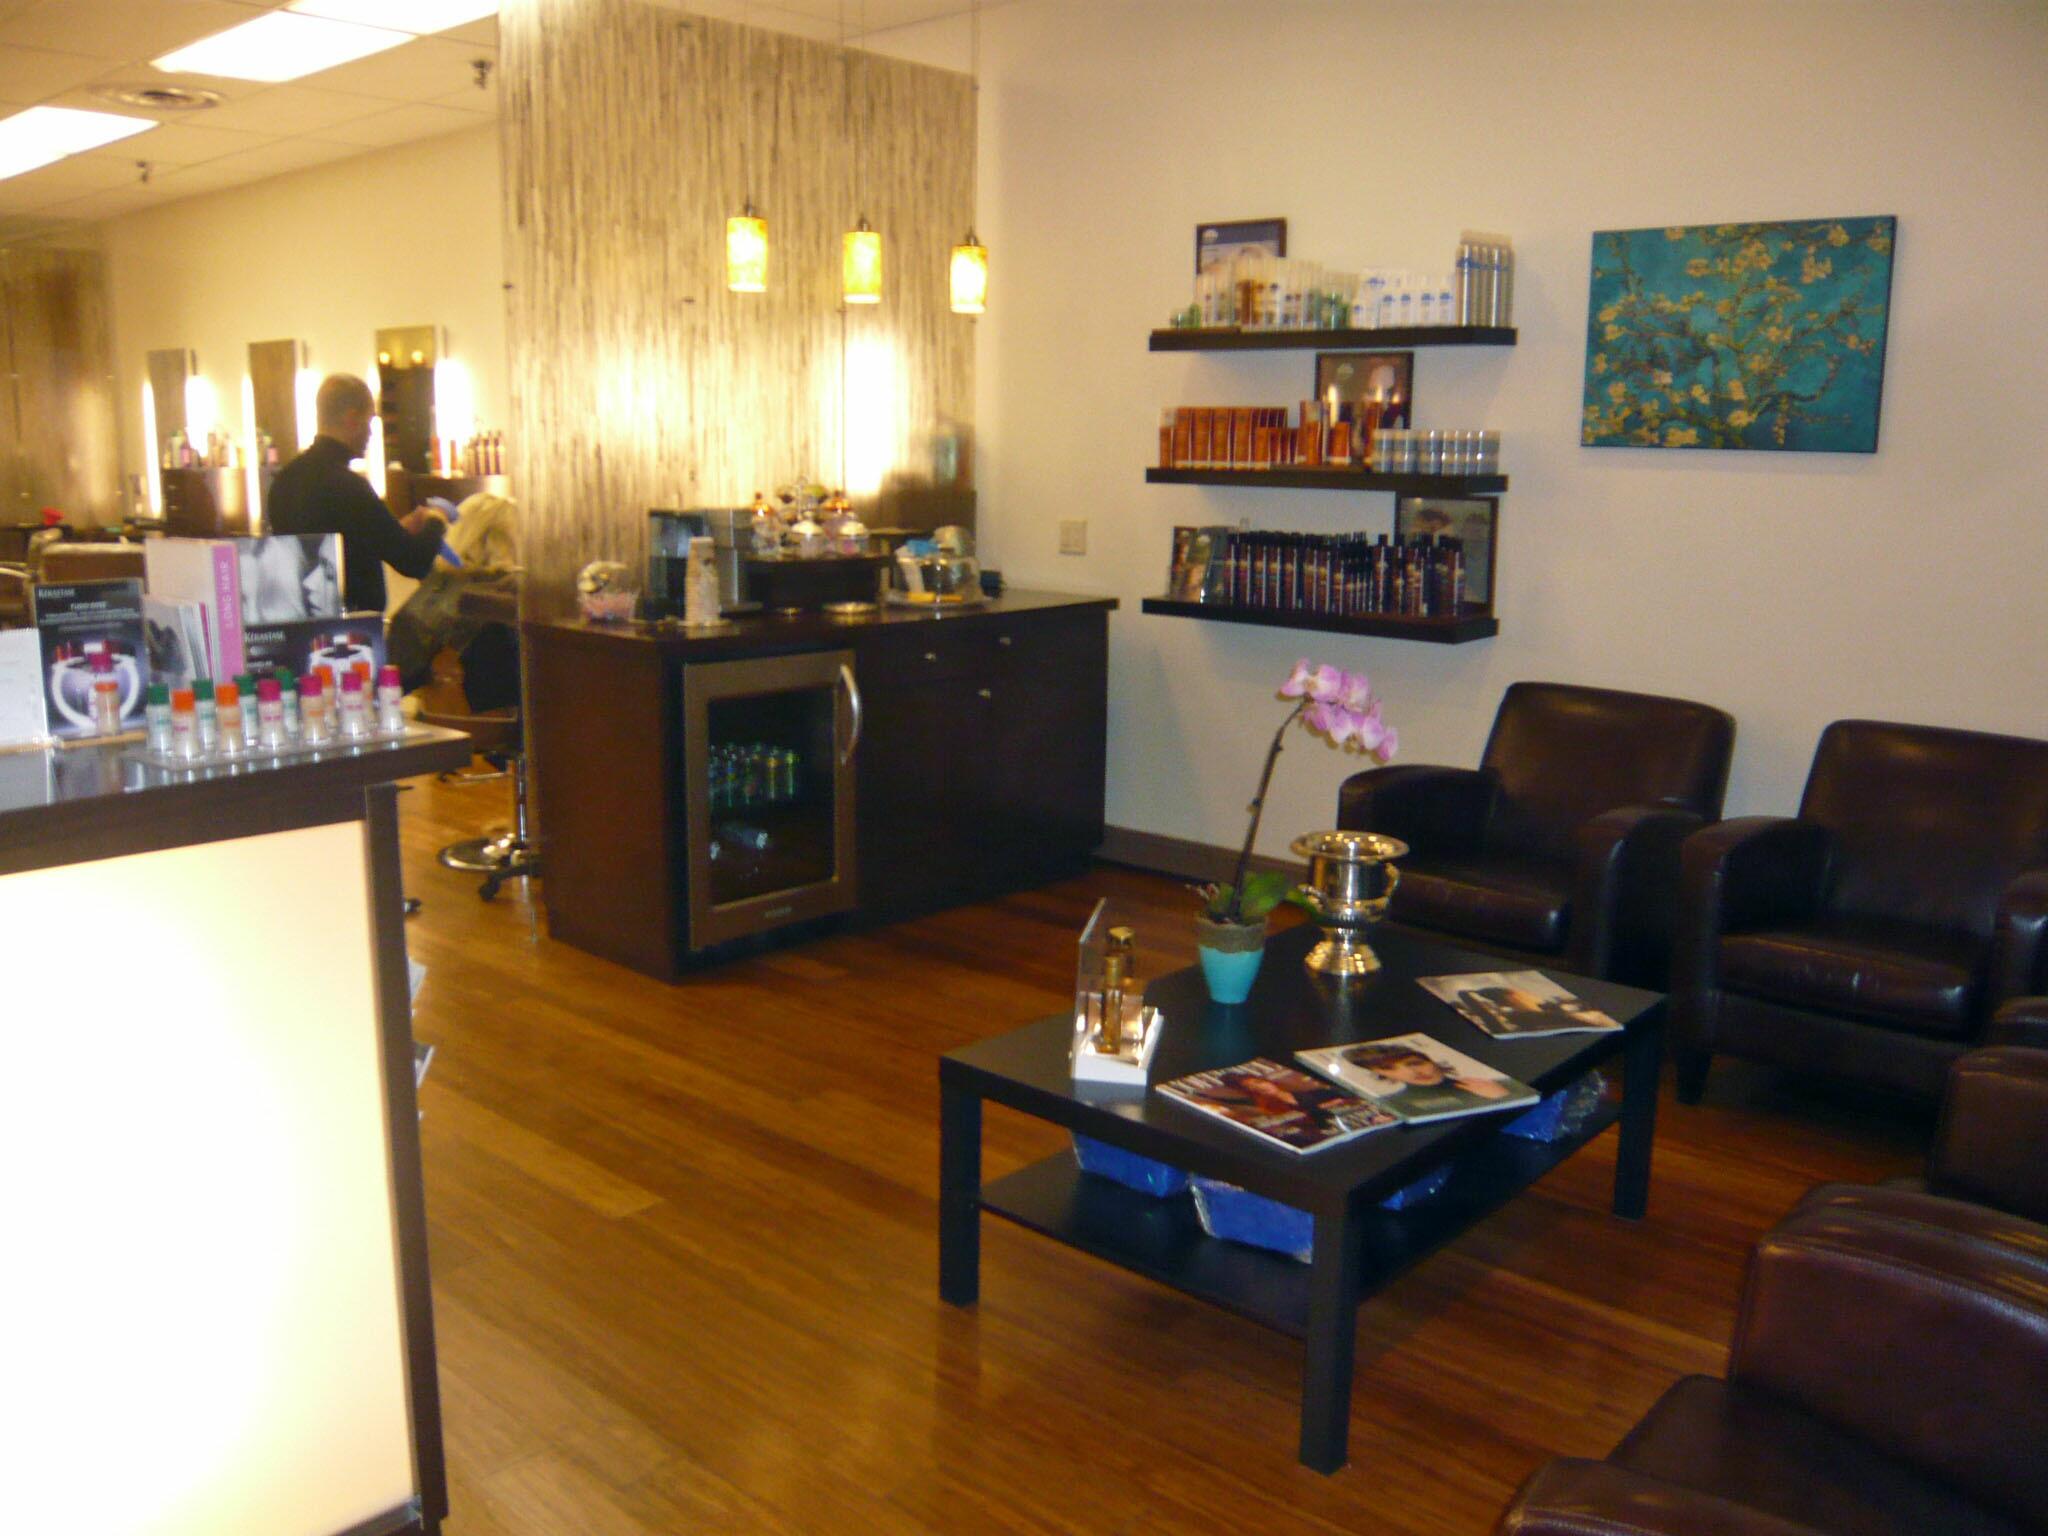 View of Salon Craft front desk and refreshments bar